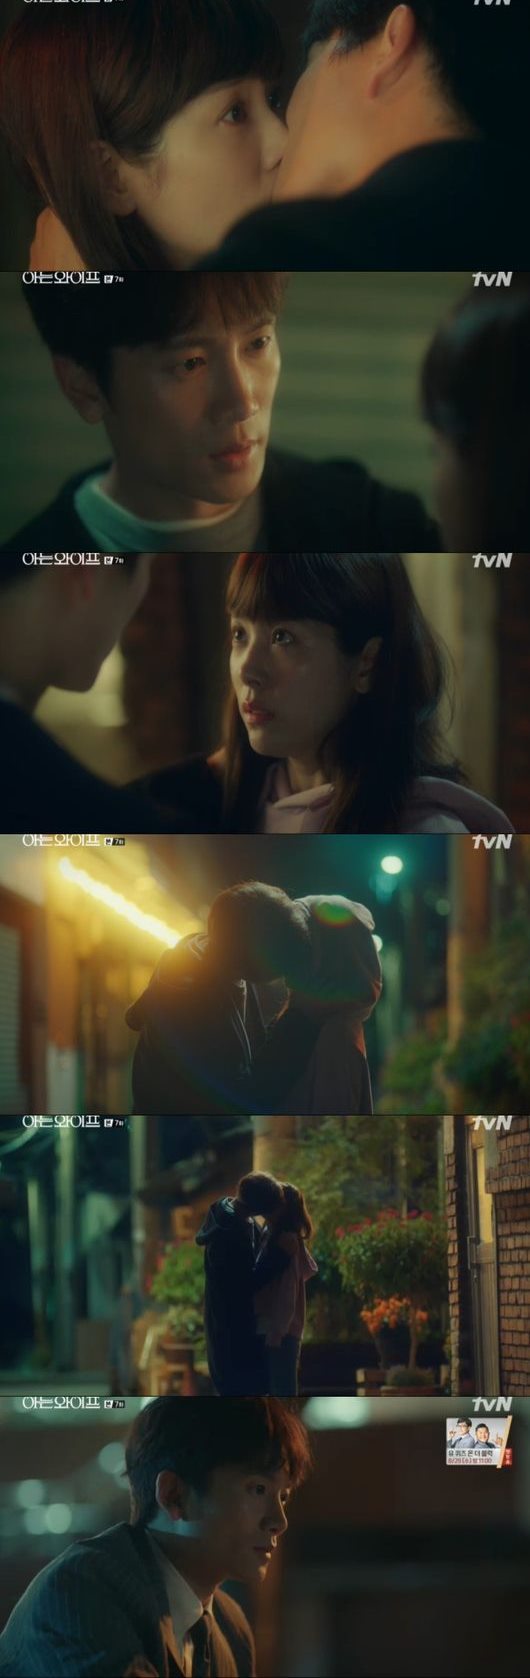 Knowing Wife Ji Sung recalled memories with Han Ji-min and tried to go back to the past.Especially, Ji Sung has raised his curiosity about future development as he finds coins that changed his fate.In TVNs drama Knowing Wife (playplayed by Yang Hee-seung/directed by Lee Sang-yeop), which was broadcast on the 22nd, Cha Ju-hyuk (Ji Sung), who is trying to regain Seo Woo Jin (Han Ji-min), was portrayed.On that day, Seo Woo Jin had a heartbeat to Cha Ju-hyuk, who put his hand on his head, but Cha Ju-hyuk already has a wife named Lee Hye-won (Ganghanna).Seo Woo Jin, who knows this, visited his drinking friend Teapot (Park Hee-bong) and said, Confessions received it from Jongno and thumped in the Han River. I was confused for a while.I have been feeling Confessions for a long time and I am excited. In the meantime, Seo Woo Jin Mo (Lee Jung Eun) continued to surprise Cha Ju-hyuk with a memory.Seo Woo Jin Mo went to the hospital where Cha Ju-hyuk worked and shouted the car west and the staff mistakenly thought it was the mother-in-law of the chaebol who did not know Seo Woo Jin.Cha Ju-hyuk, who saw this, rushed out of Seo Woo Jin Mo and said, Maam, why do you remember me?I heard a meaningful answer, Yeon is something that can not be cut off like a palm of your hand. In the meantime, Seo Woo Jin decided to make a relationship with Yoon Jong-hoo (Jang Seung-jo) in the good sincerity.I decided to shake hands with the two and make a secret relationship and Confessions the devotion to Cha Ju-hyuk at the Teapot store.Cha Ju-hyuk, who heard this, made a bitter smile saying Congratulations and naturally went on a couple trip with Cha Ju-hyuk Lee Hye Won, Yoon Jong Hoo Seo Jin and Oh Sang Sik (Oh Ui Sik) Teapot together for one night and two days.On his way back, Cha Ju-hyuk recalled his first kiss memories with Seo Woo Jin and missed the past more.And on the trip, Cha Ju-hyuk overreacted, caring about Seo Woo Jin and Yoon Jong-hu, even hotly told that couples should use the same room.Lee Hye-won started to care about Seo Woo Jin and became a rival to him.Seo Woo Jin fell to a high fever in the air conditioner.Cha Ju-hyuk searched the whole neighborhood for the antipyretics that Seo Woo Jin had been eating, and at that time, Yun Jong-hoo drove Seo Woo Jin to the emergency room.Seo Woo Jin was impressed by Yun Jong-hoo, who struggled for him; the two who later returned to the hostel.Seo Woo Jin was asleep and Cha Ju-hyuk was troubled by the mistake that Yoon Jong-hoo was kissing him while watching the back of Seo Woo Jins seat belt.Then he found the coin to return his fate.On this day, Ji Sung was saddened by the fact that he could not let go of his wife, Han Ji-min.Han Ji-min also felt an unknown excitement to Ji Sung, and the two are not married now, but they have gathered their attention with an unbreakable relationship when they were married in another fate.In particular, Ji Sung and Han Ji-min are said to have increased the immersion of the drama by giving excitement and sometimes touching with the breathing of the past and present.In particular, Lee Jung-eun, who appeared as Han Ji-min, raised his curiosity with a meaningful word, The kite is a thing that can not be stopped like a palm flip.It is noteworthy what future Ji Sung will face when he finds a coin to return to the past.Capture the broadcast screen for Knowing Wife